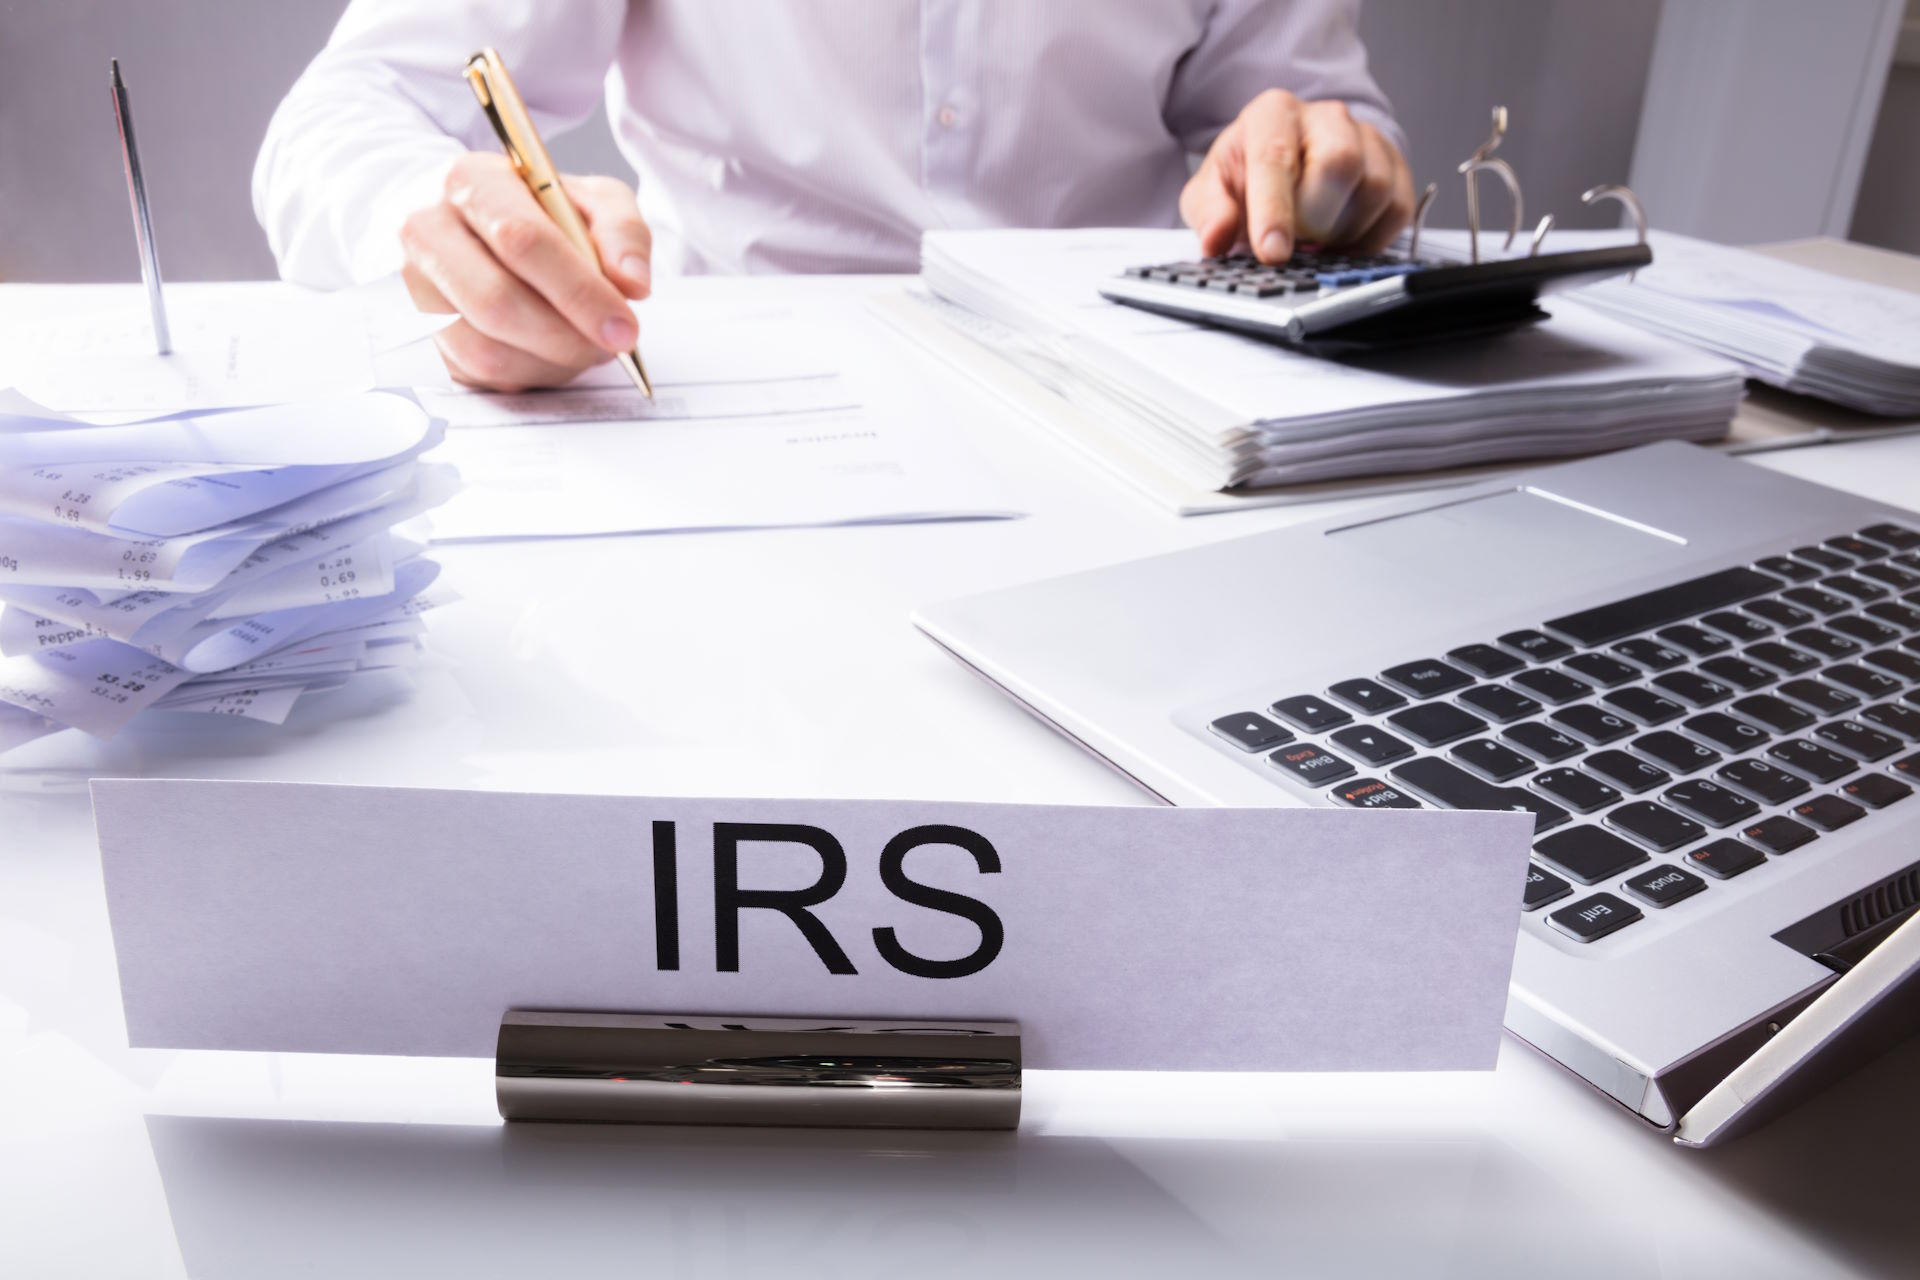 Irs,Nameplate,In,Front,Of,Accountant,Calculating,Tax,On,Desk